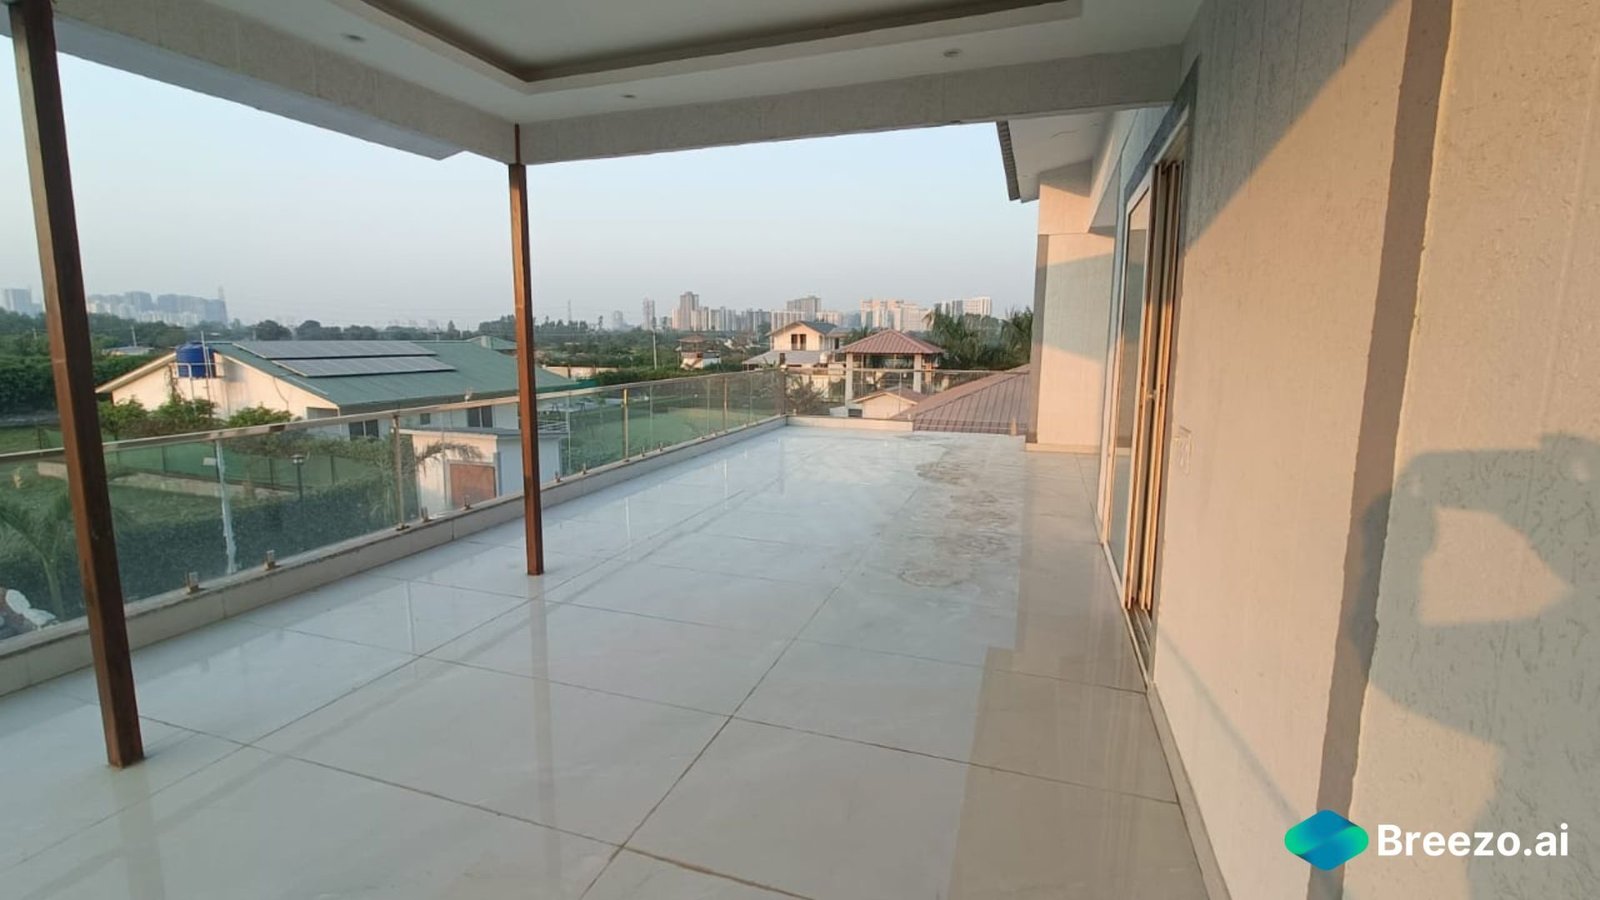 Farmhouse for film shoots in Delhi NCR, Gurgaon, and Noida. Modern architecture and stunning pool area.